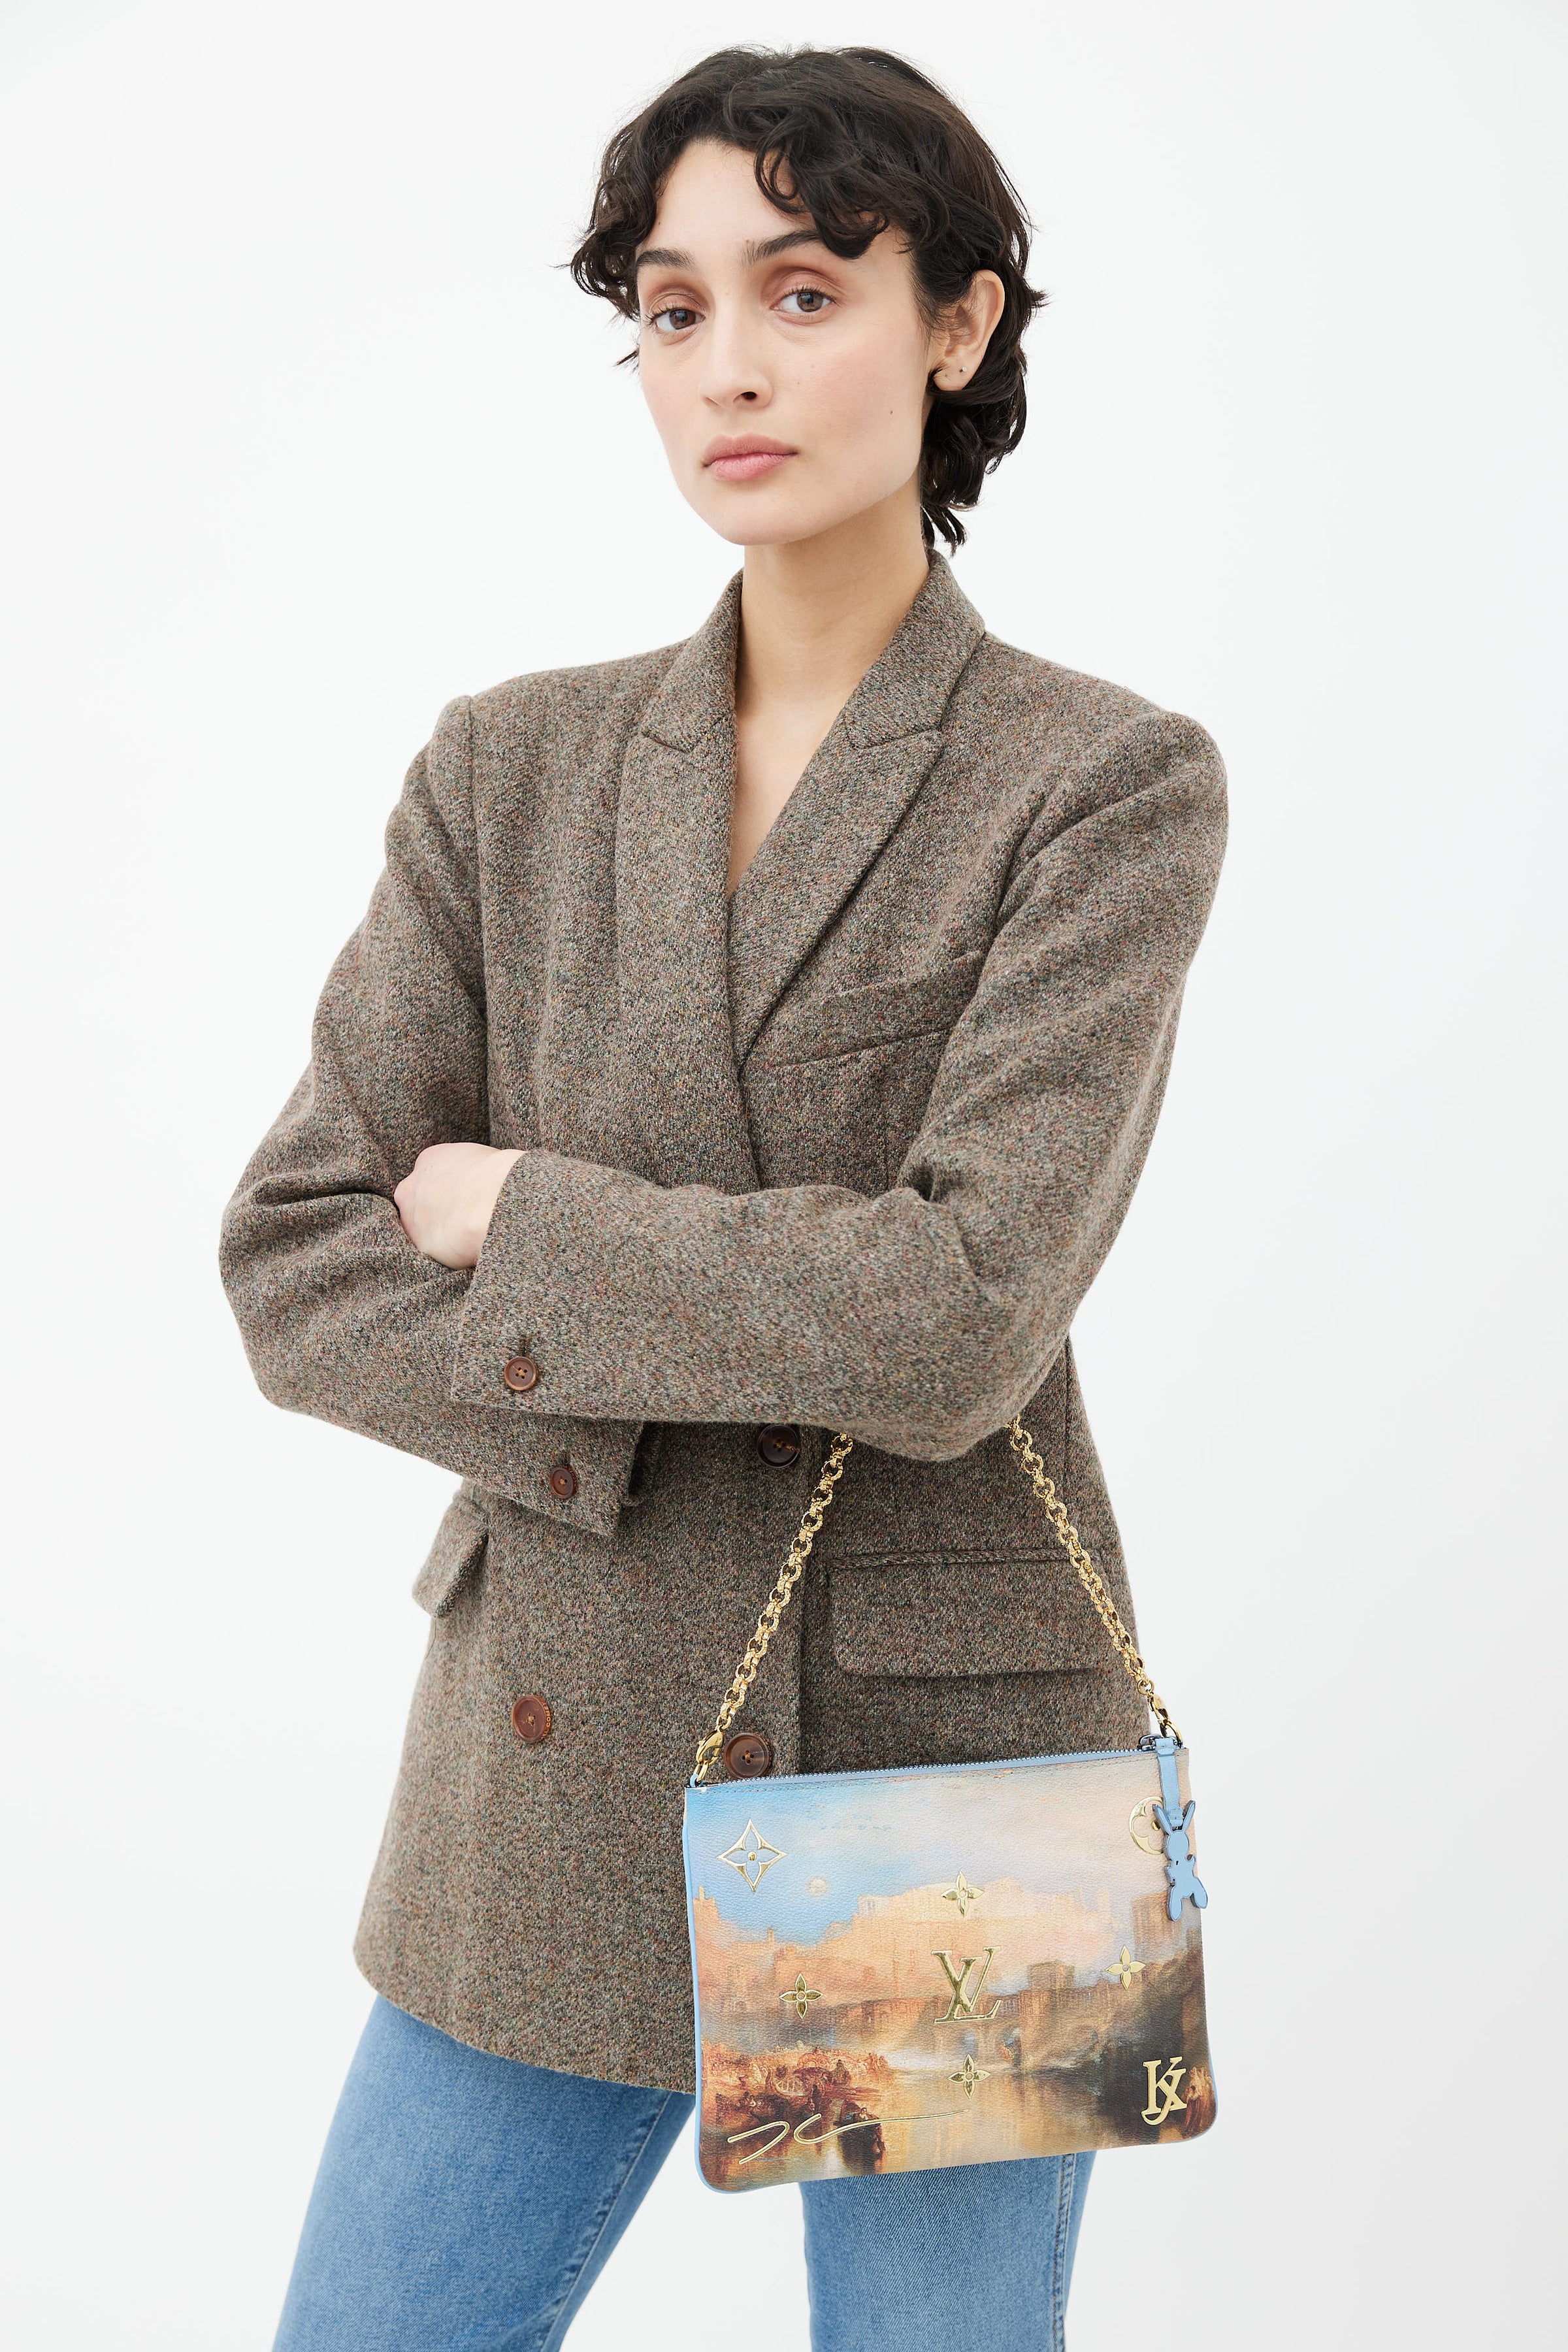 Highly Anticipated London Auction To Include 5 Rare Louis Vuitton Art  Handbags